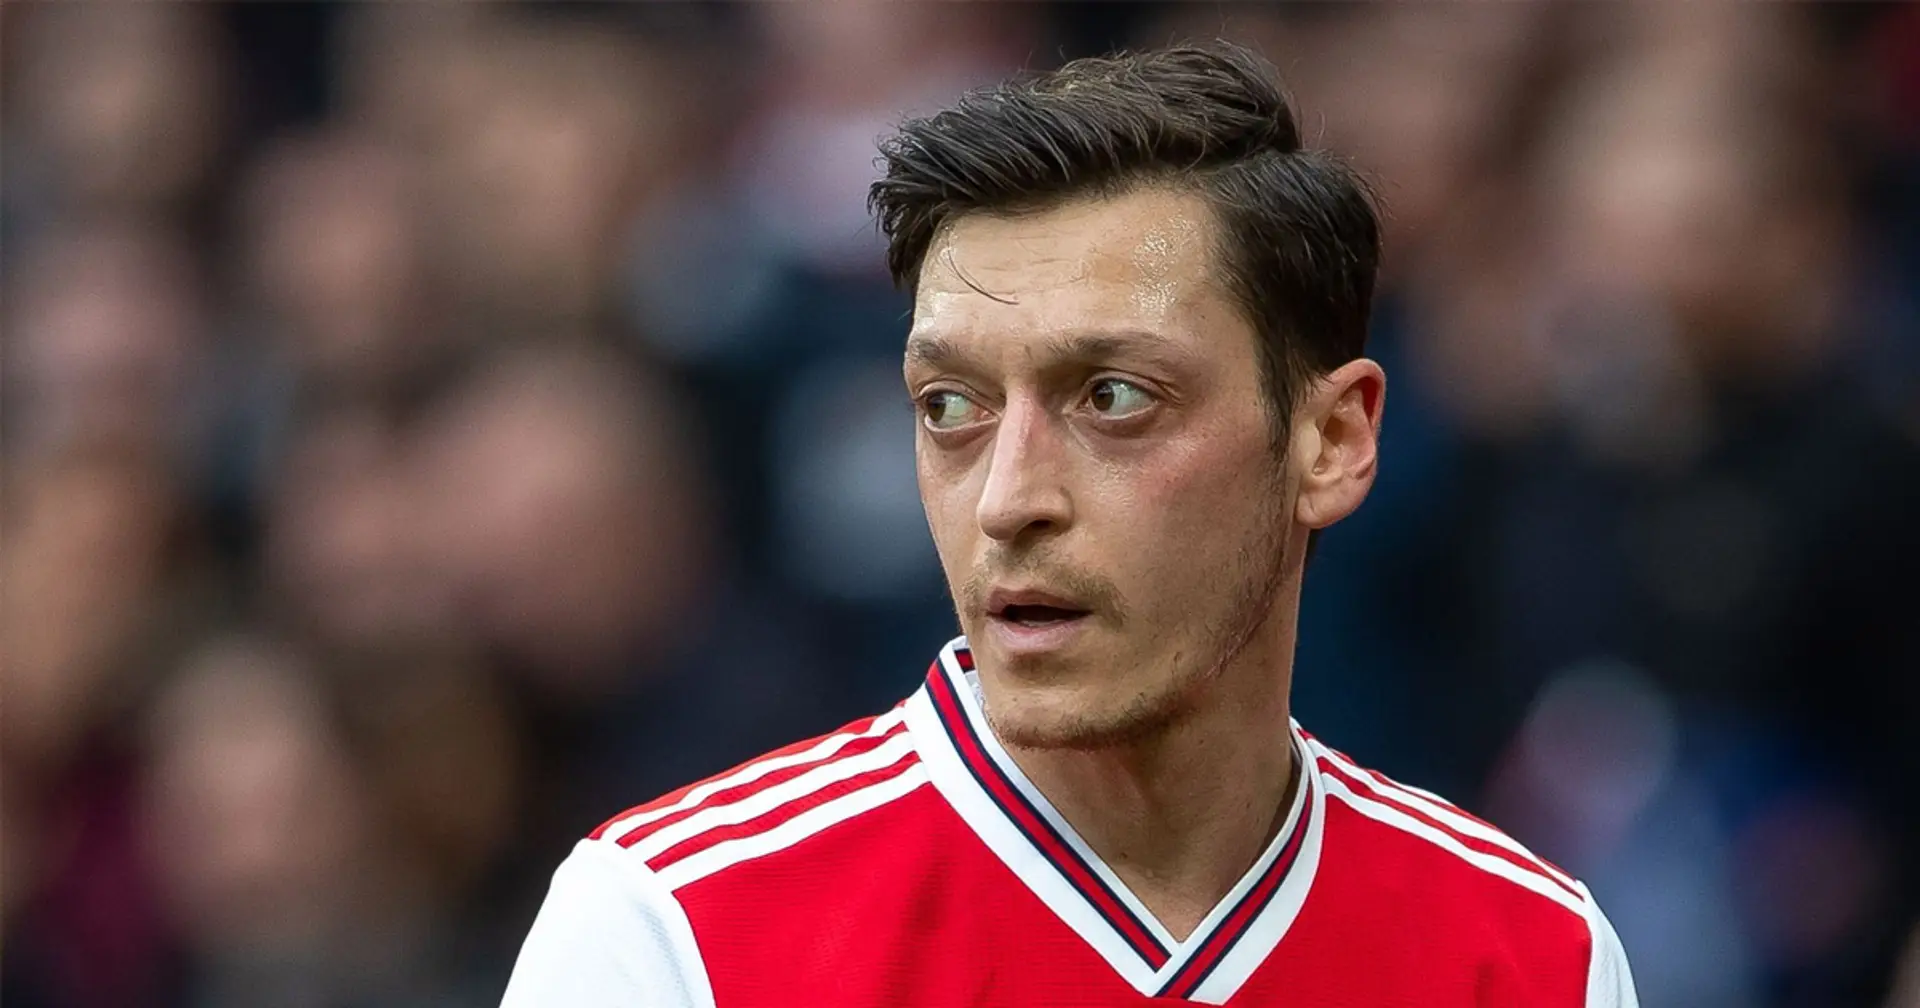 Ozil wage cut scandal far from simple: all we know so far summed up in 8 points